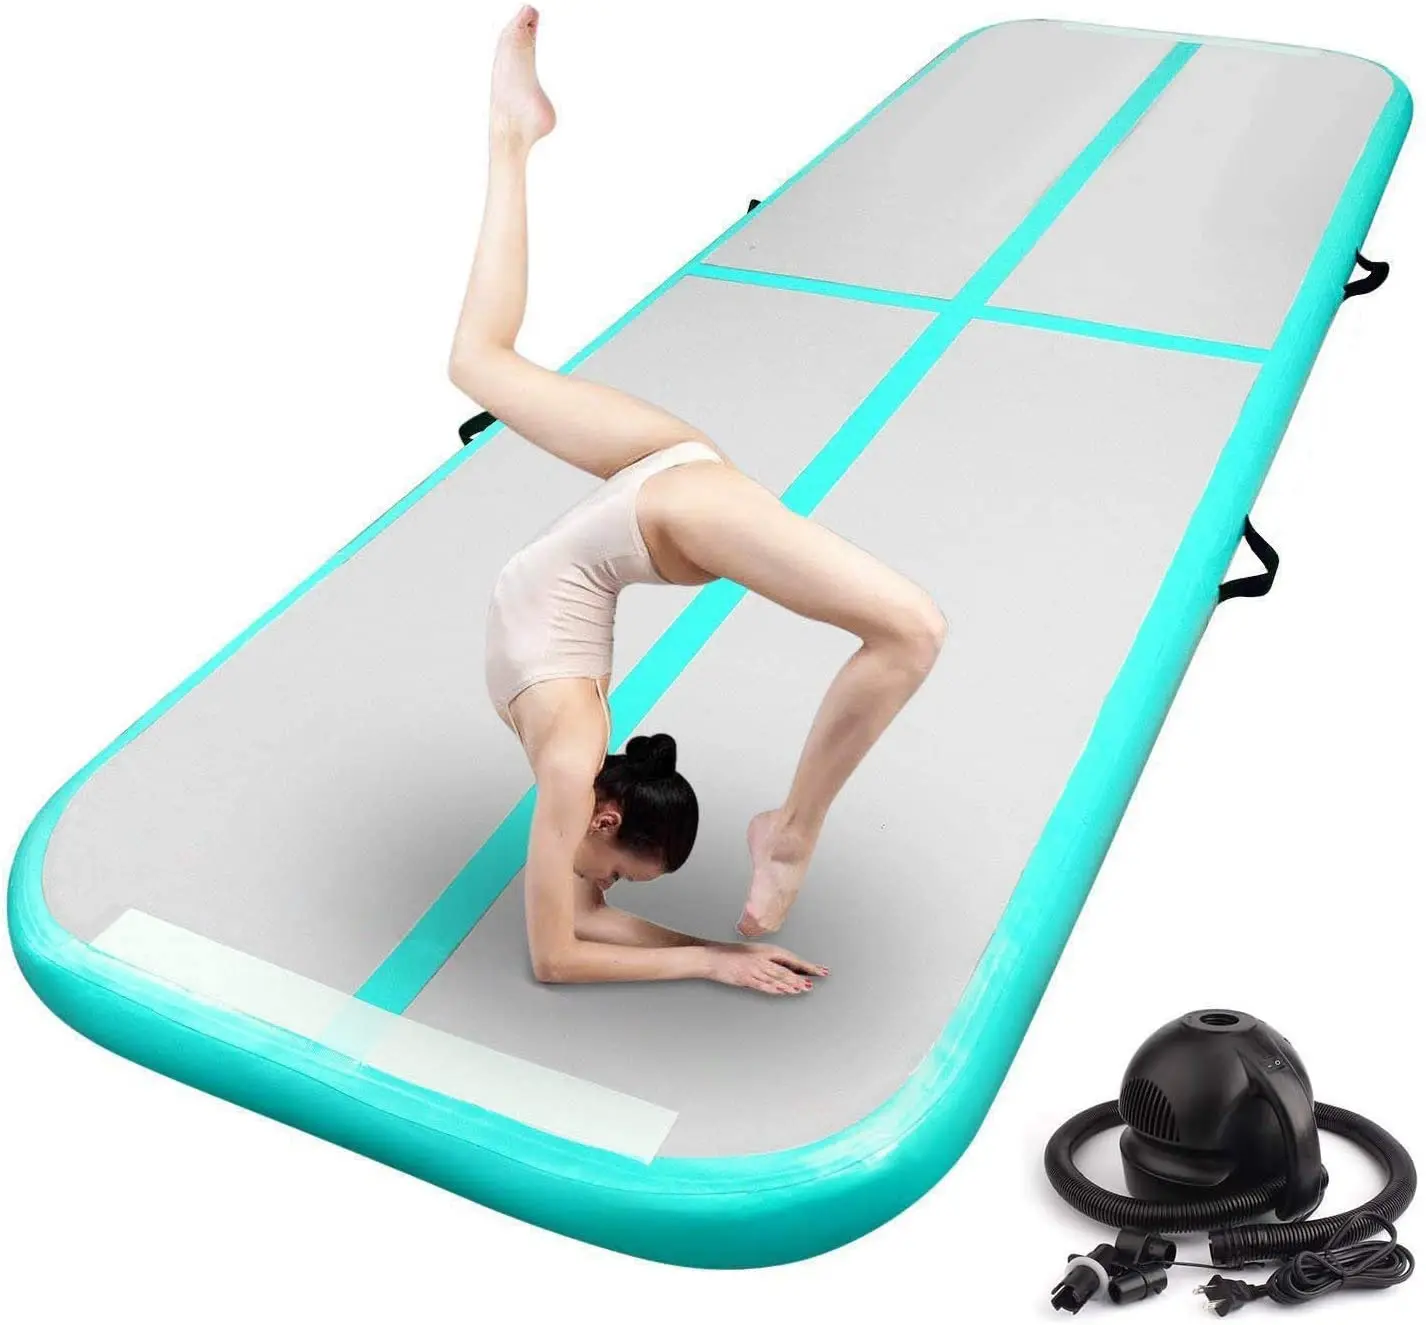 

Air track mat gymnastic mats inflatable air track tumble track, Customized